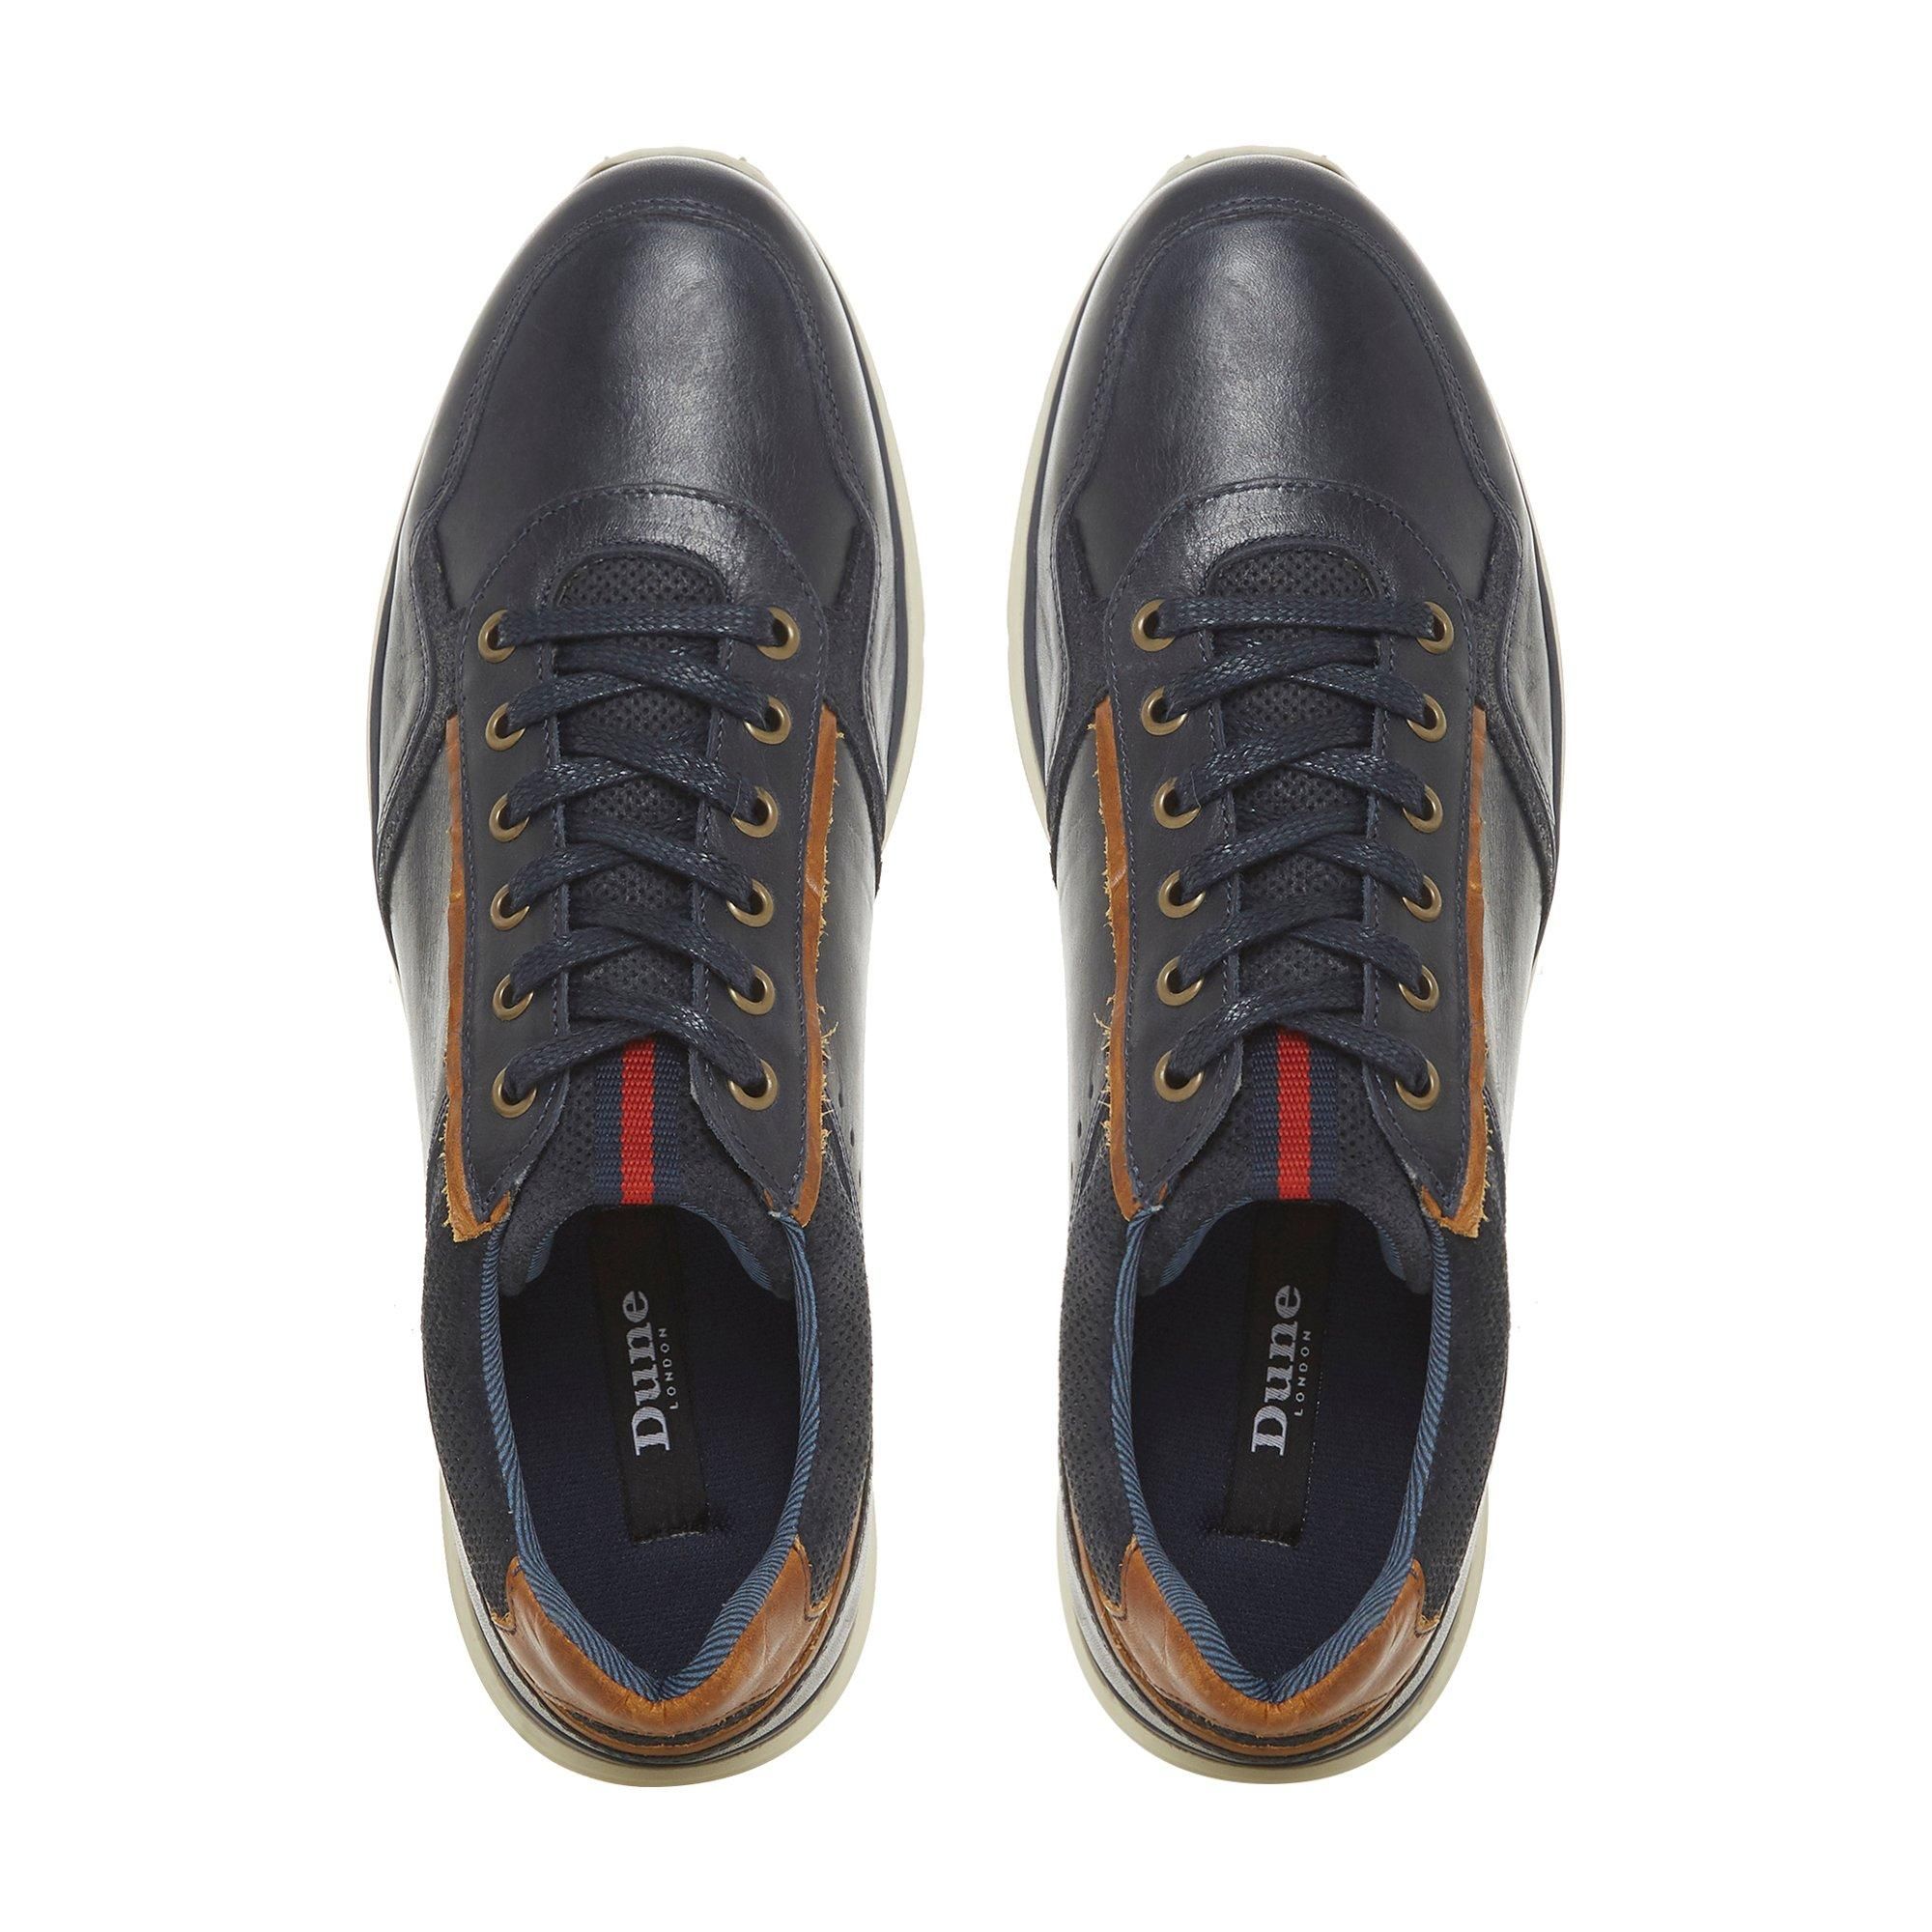 Breathe new life into your casual shoe range with the Tynecastle trainers. Featuring a leather upper with piped detail and a lace-up fastening. A contrasting sporty sole complete this stellar off-duty design.